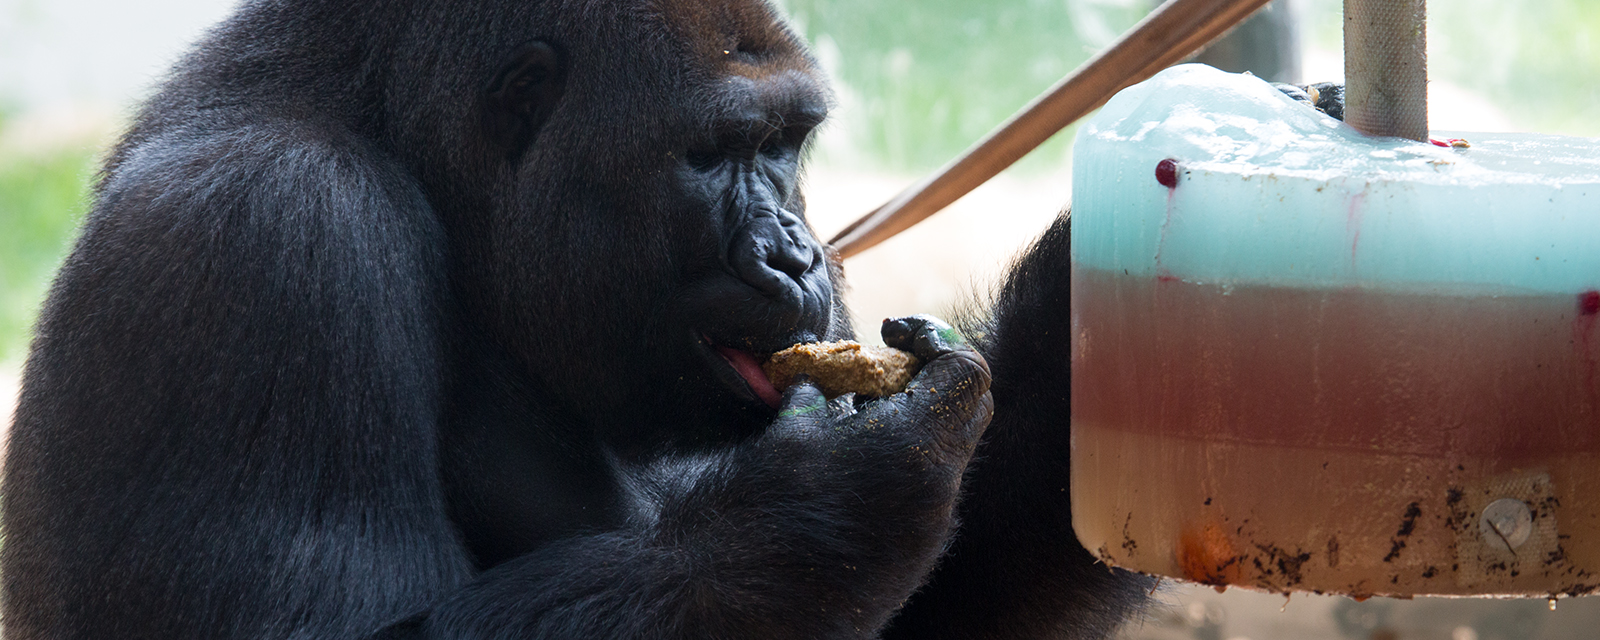 Western lowland gorilla eating a treat pulled from an icicle enrichment